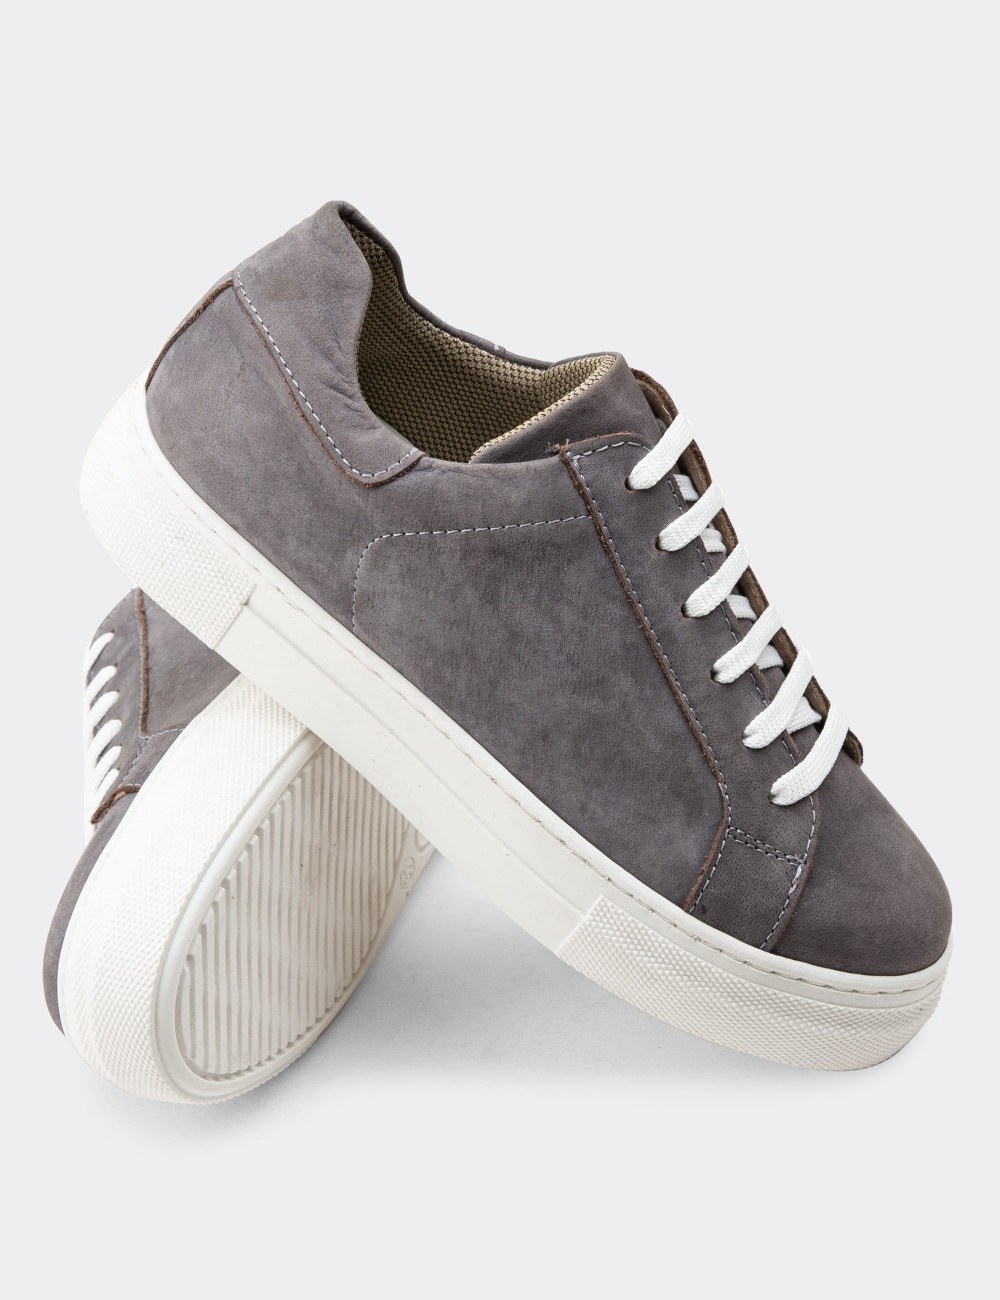 Gray Nubuck Leather Sneakers - Z1681ZGRIC05